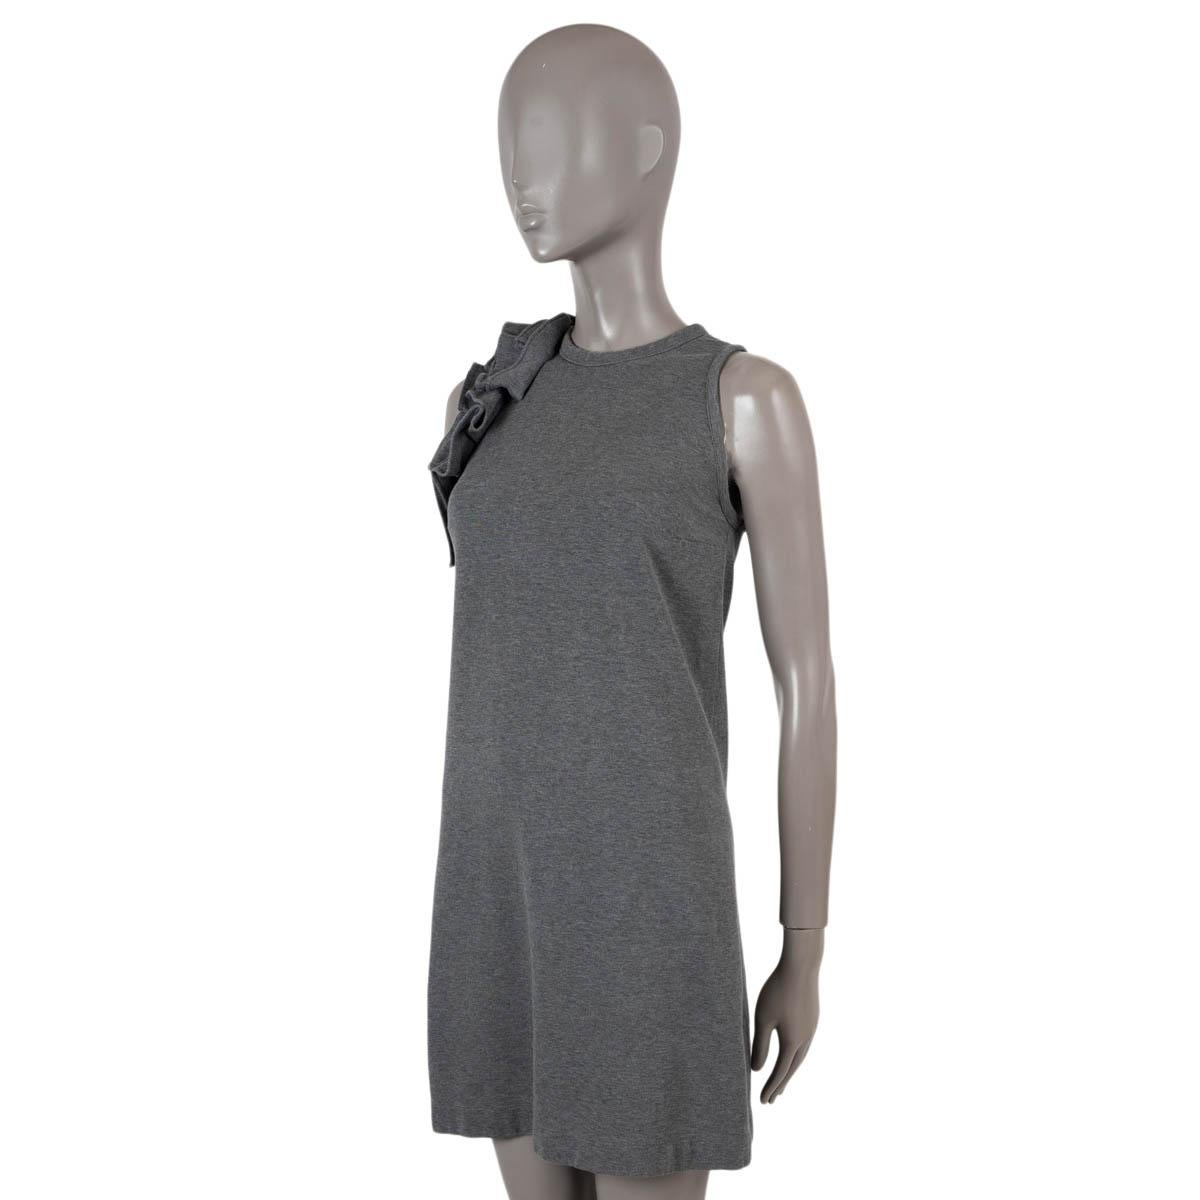 100% authentic Brunello Cucinelli sleeveless jersey dress in grey cotton and elastane. The design features a round neck, flounces on one shoulder and opens with a zipper on the back. Unlined. Has been worn and is in excellent condition.